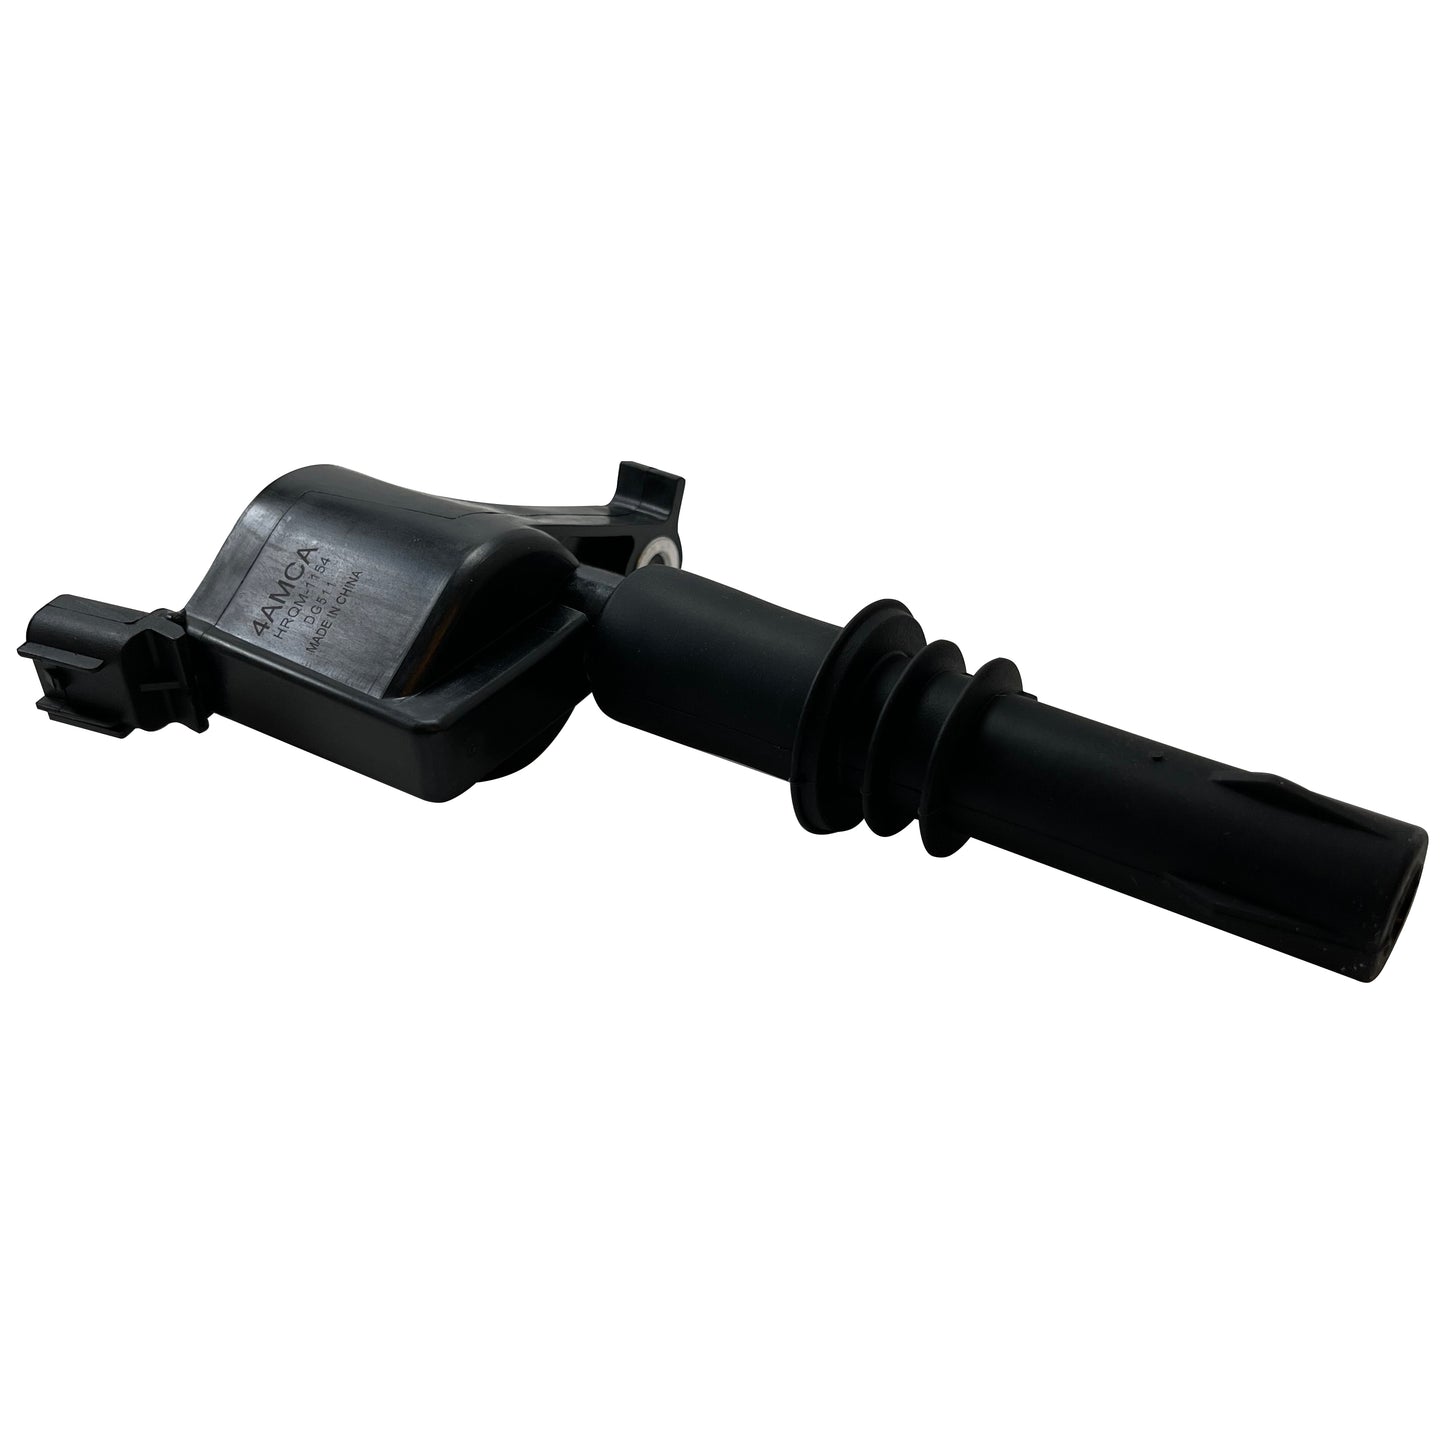 Ignition Coil Fits Ford 4.6, 5.4L 6.8L 2005 - 2009, Repl SMP# FD508 NAPA IC617